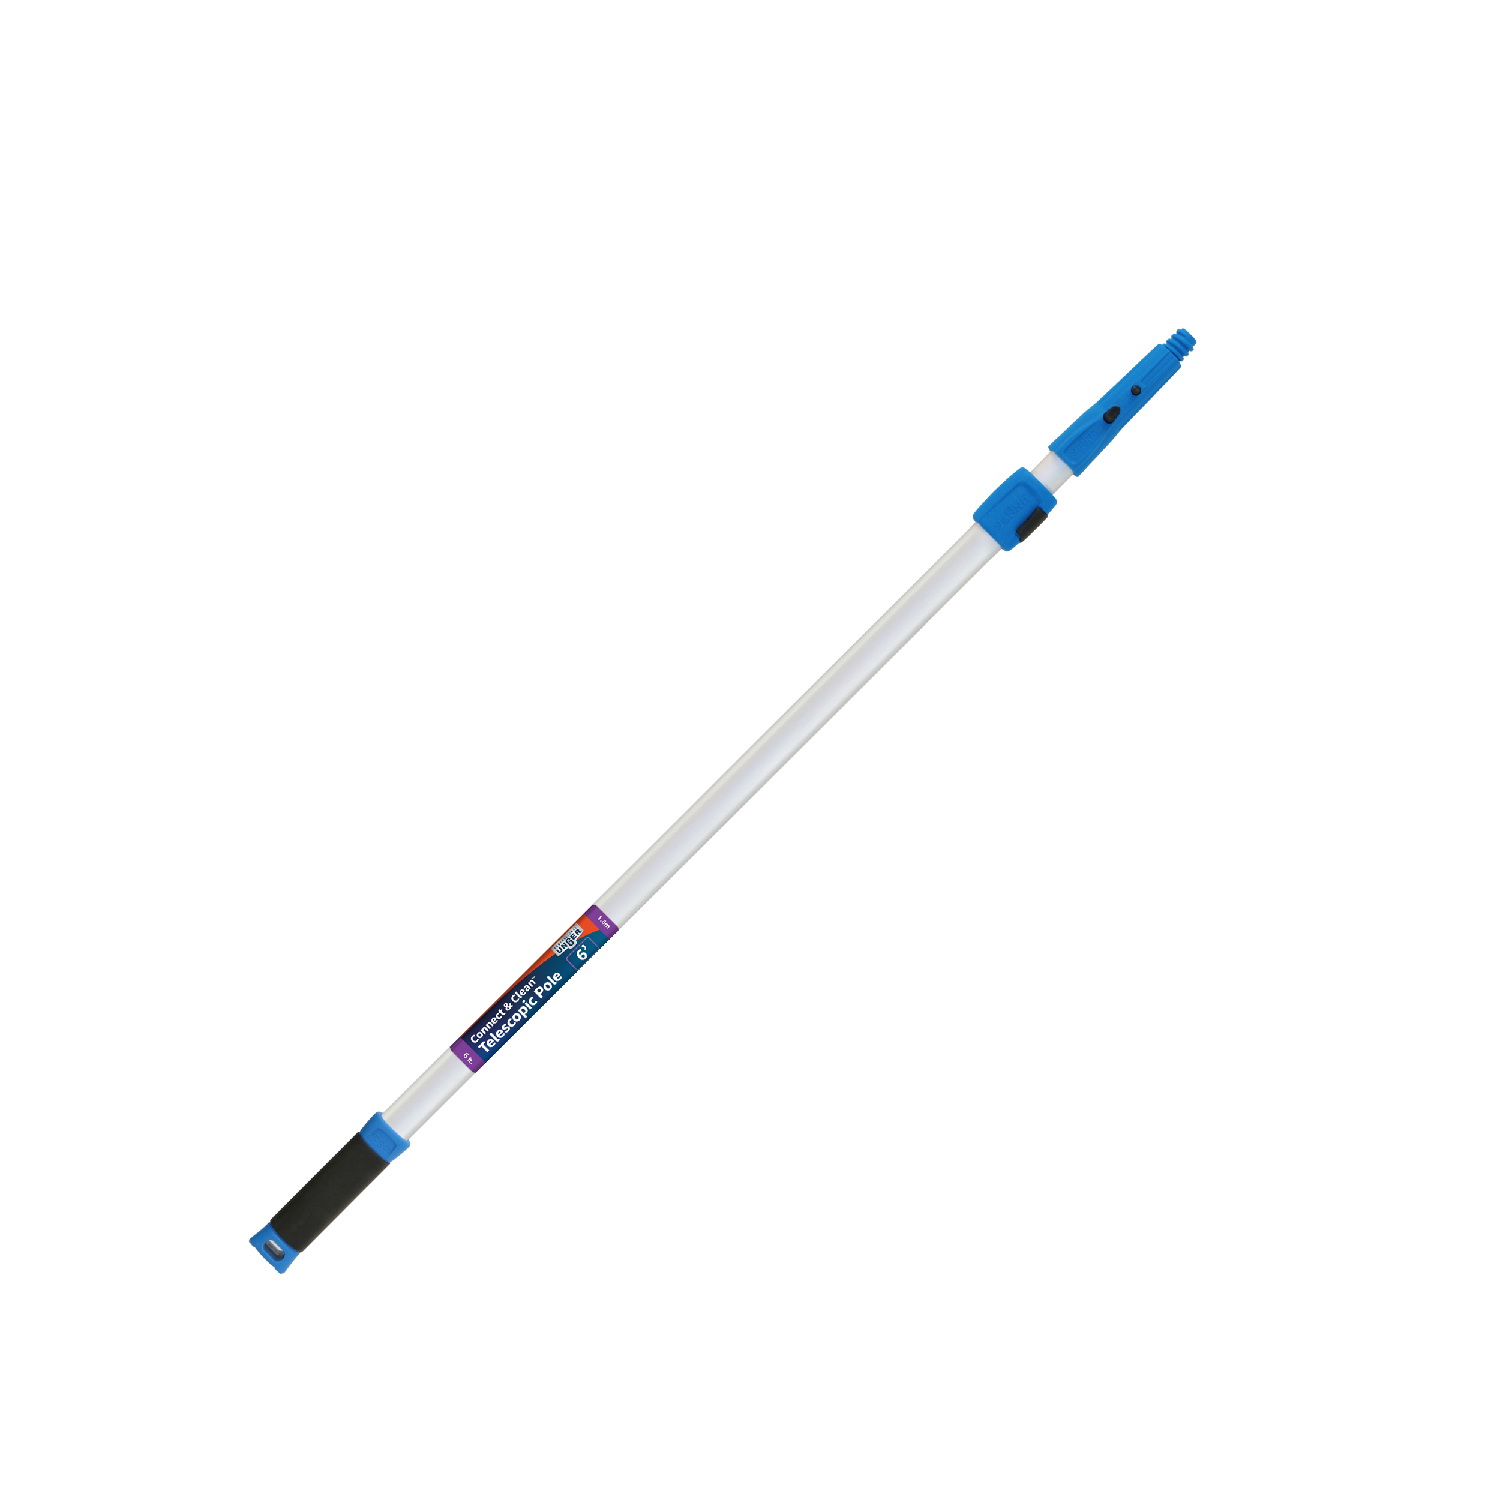 Professional Unger 972920 Telescopic Pole with Connect and Clean Locking Cone and Quick-Flip Clamps, 3 ft Min Pole L - 1